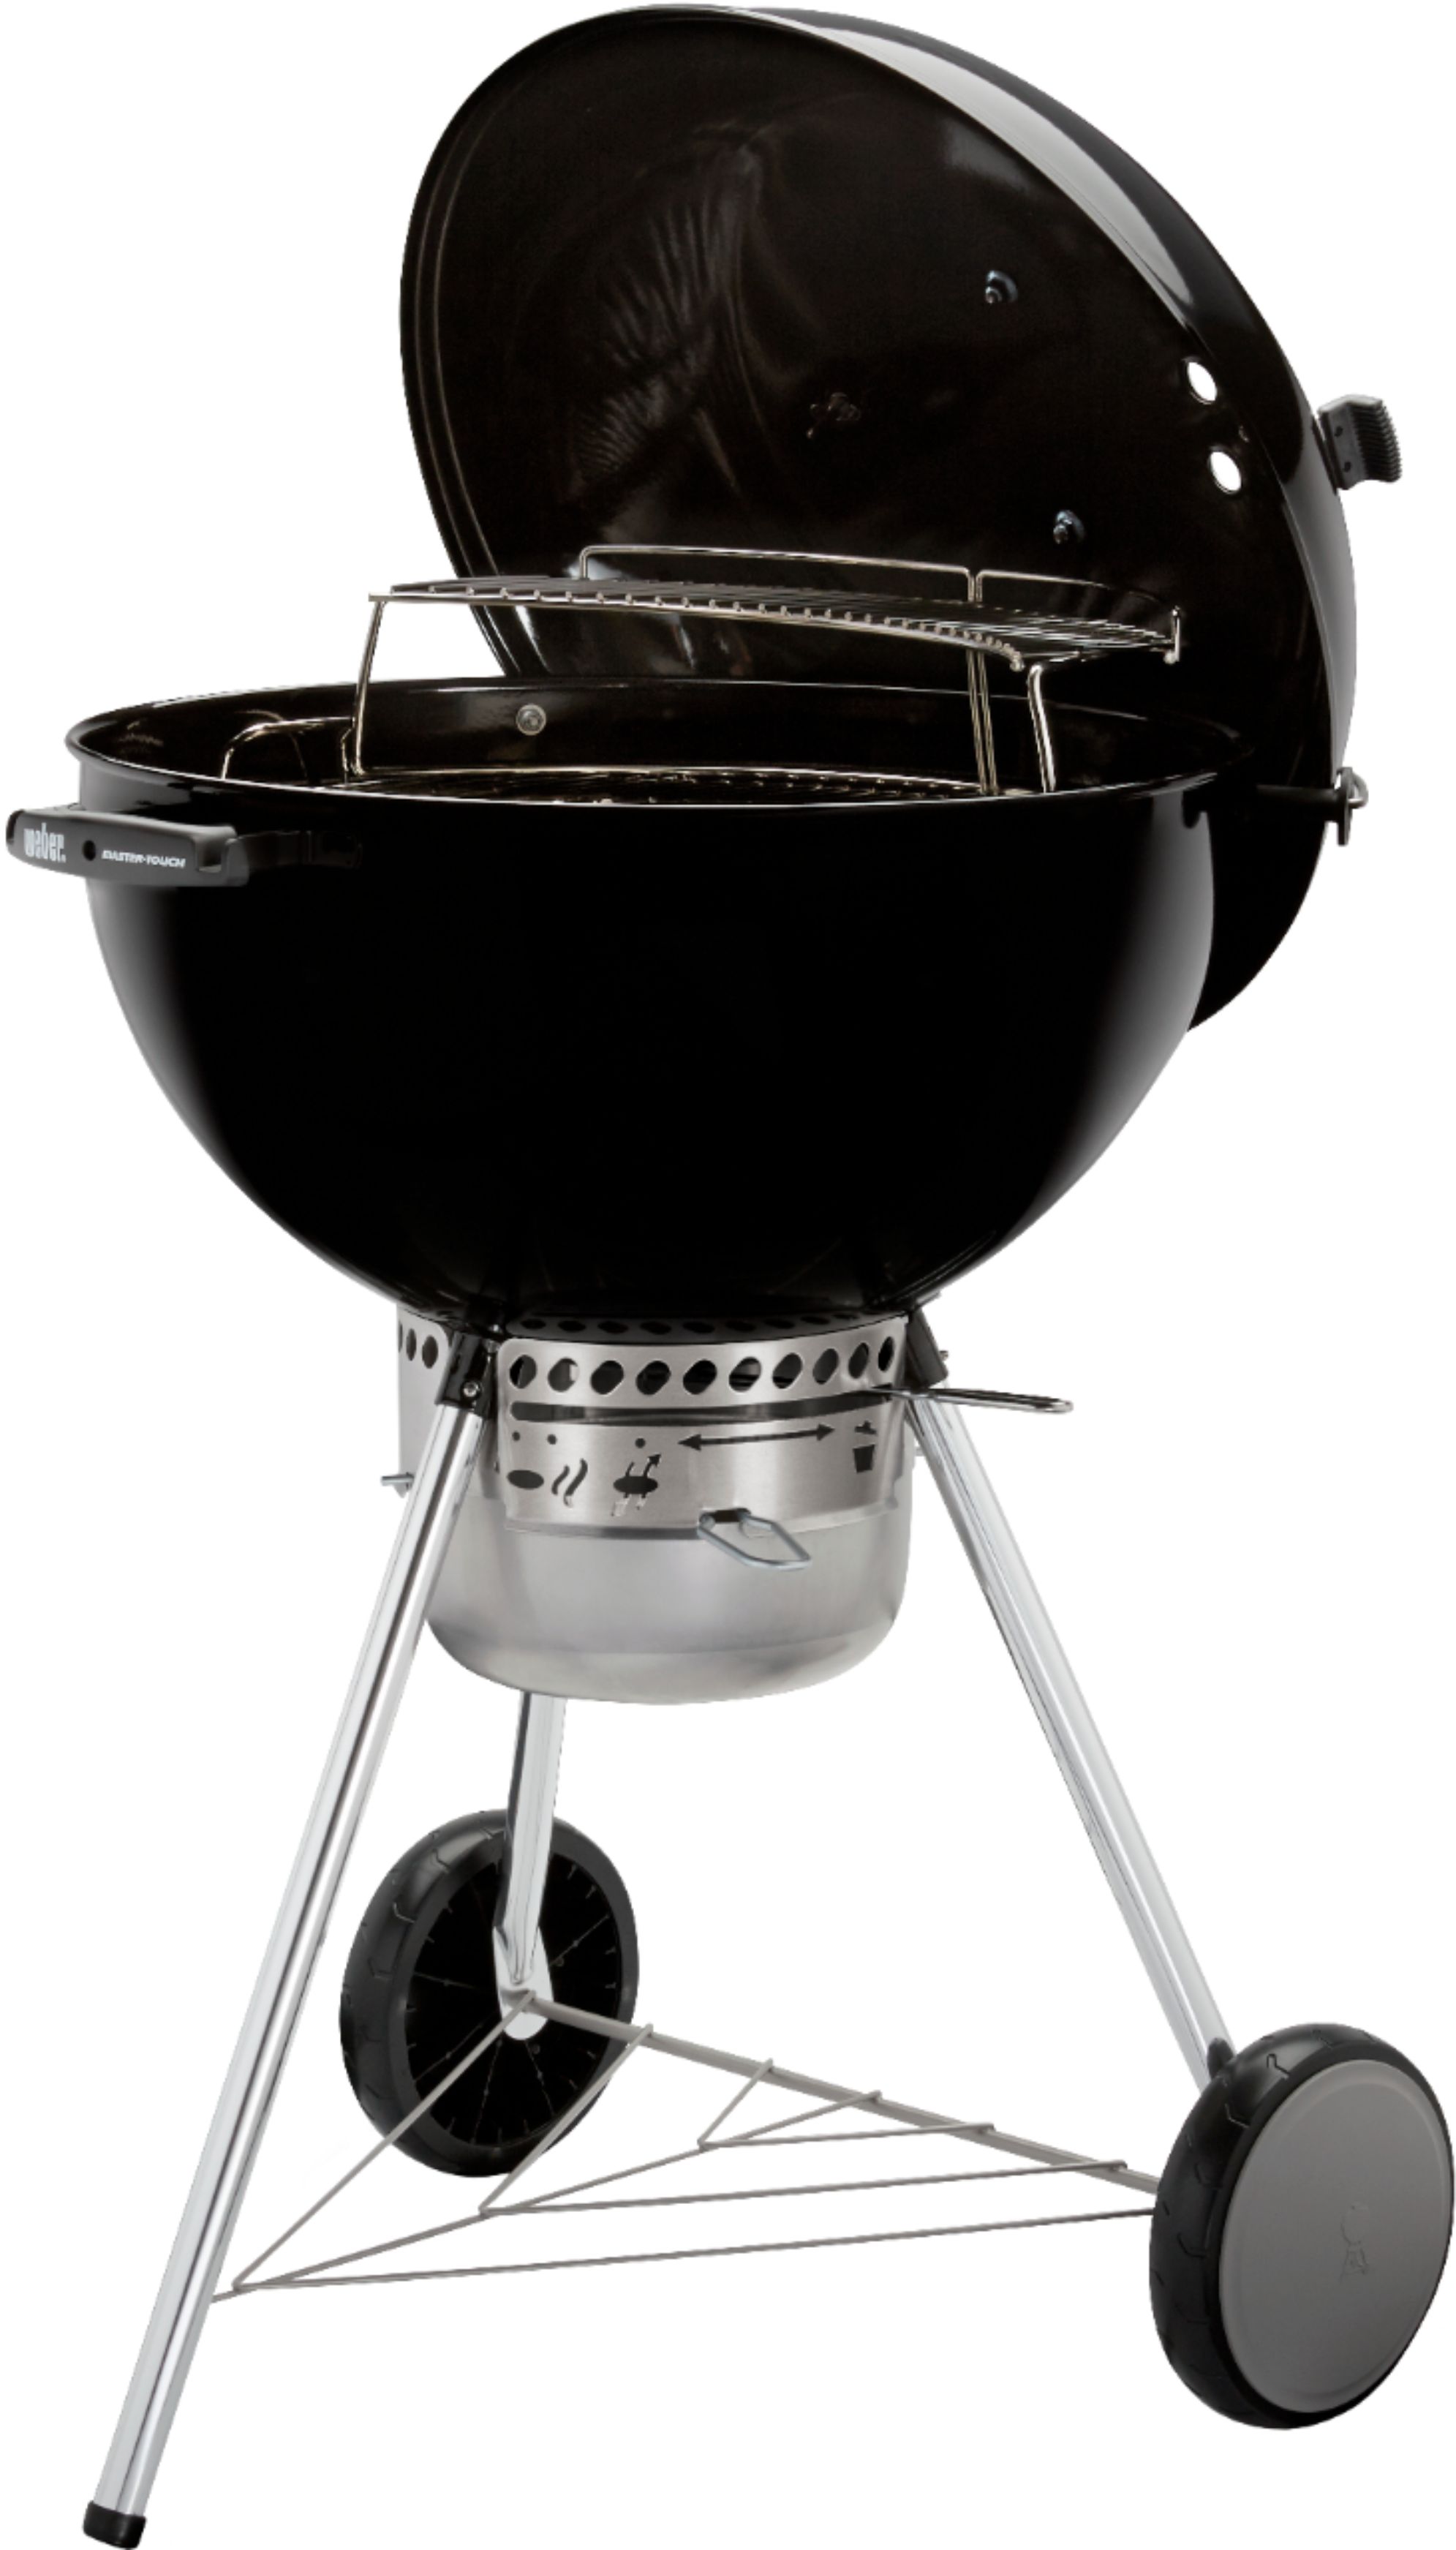 Weber 22 in. Master-Touch Grill Black 14501001 - Best Buy